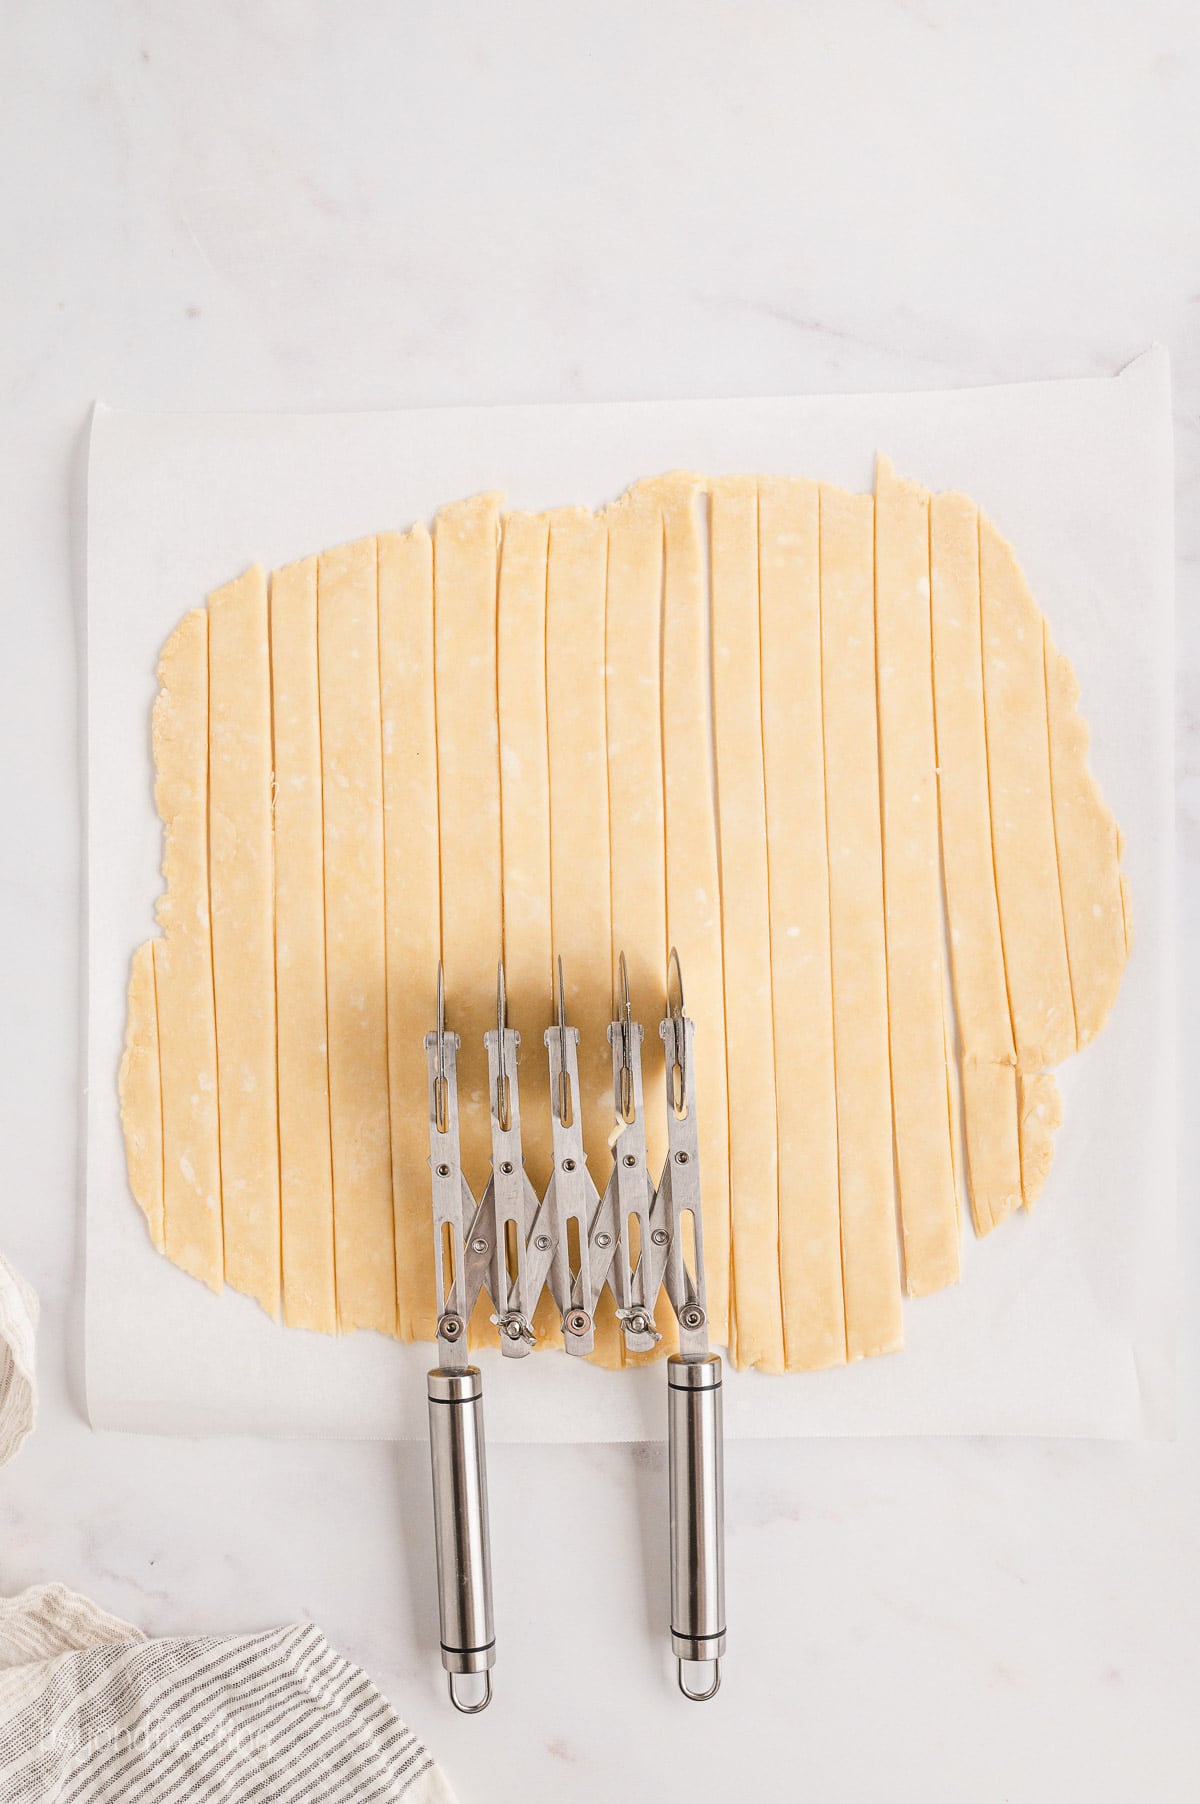 A pastry wheel cutter is used to cut pie crust into lattice strips.